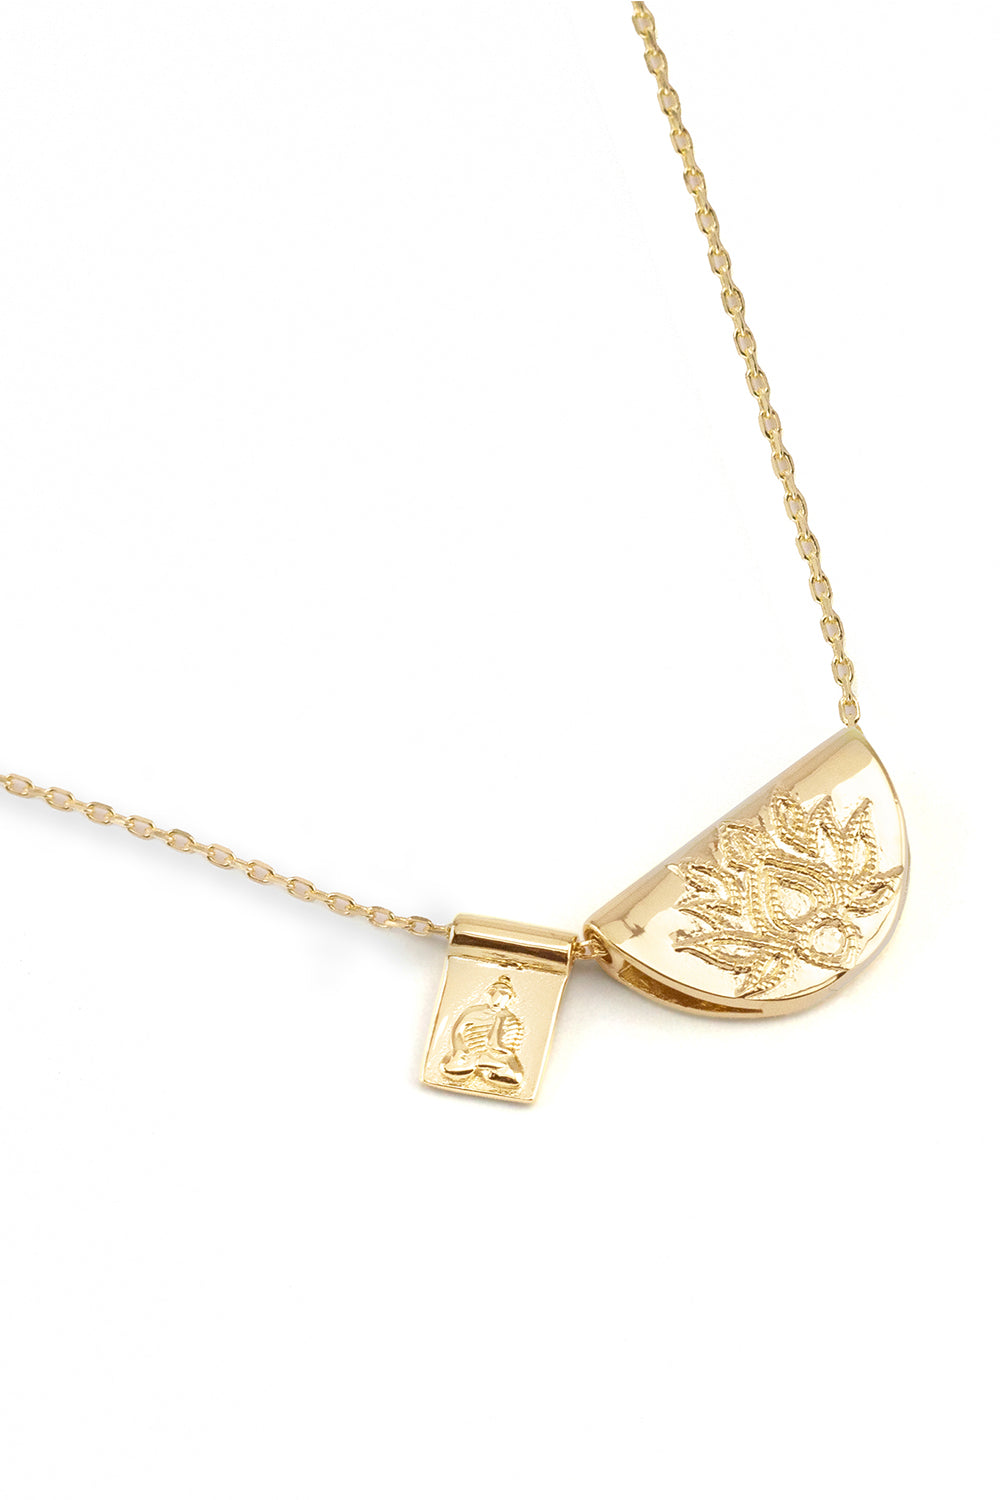 BY CHARLOTTE LOTUS LONG NECKLACE GOLD